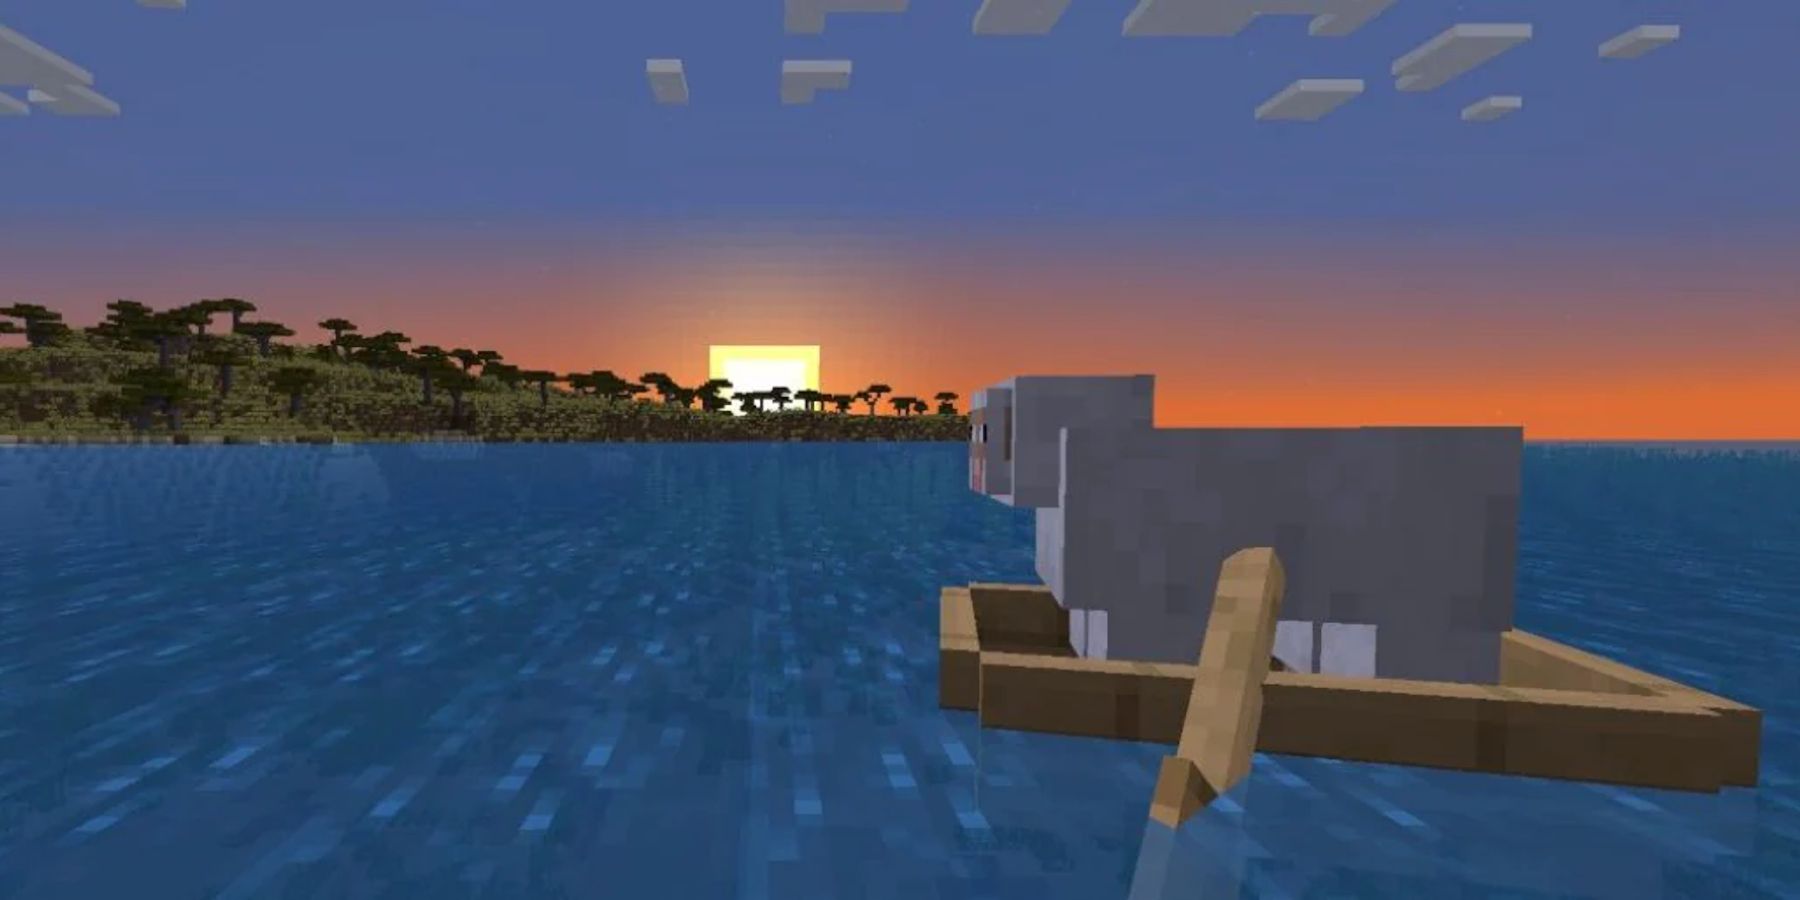 sheep in a boat minecraft